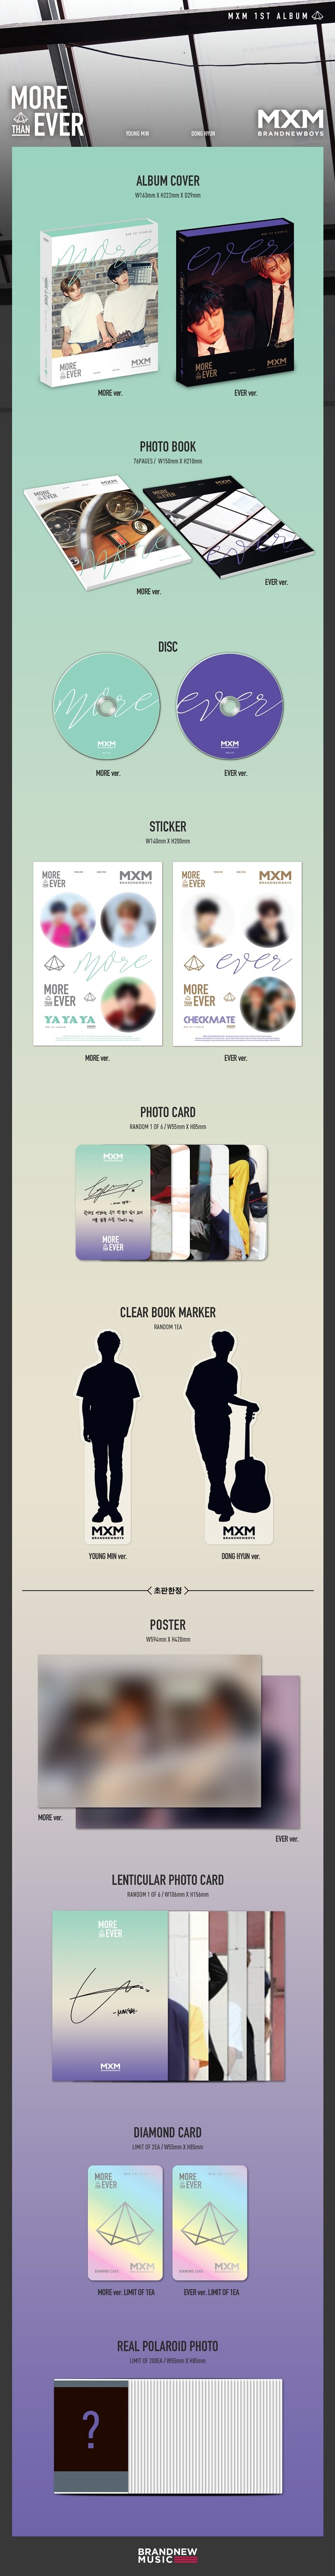 1 CD
1 Photo Book (76 pages)
1 Sticker
1 Photo Card
1 Bookmarker